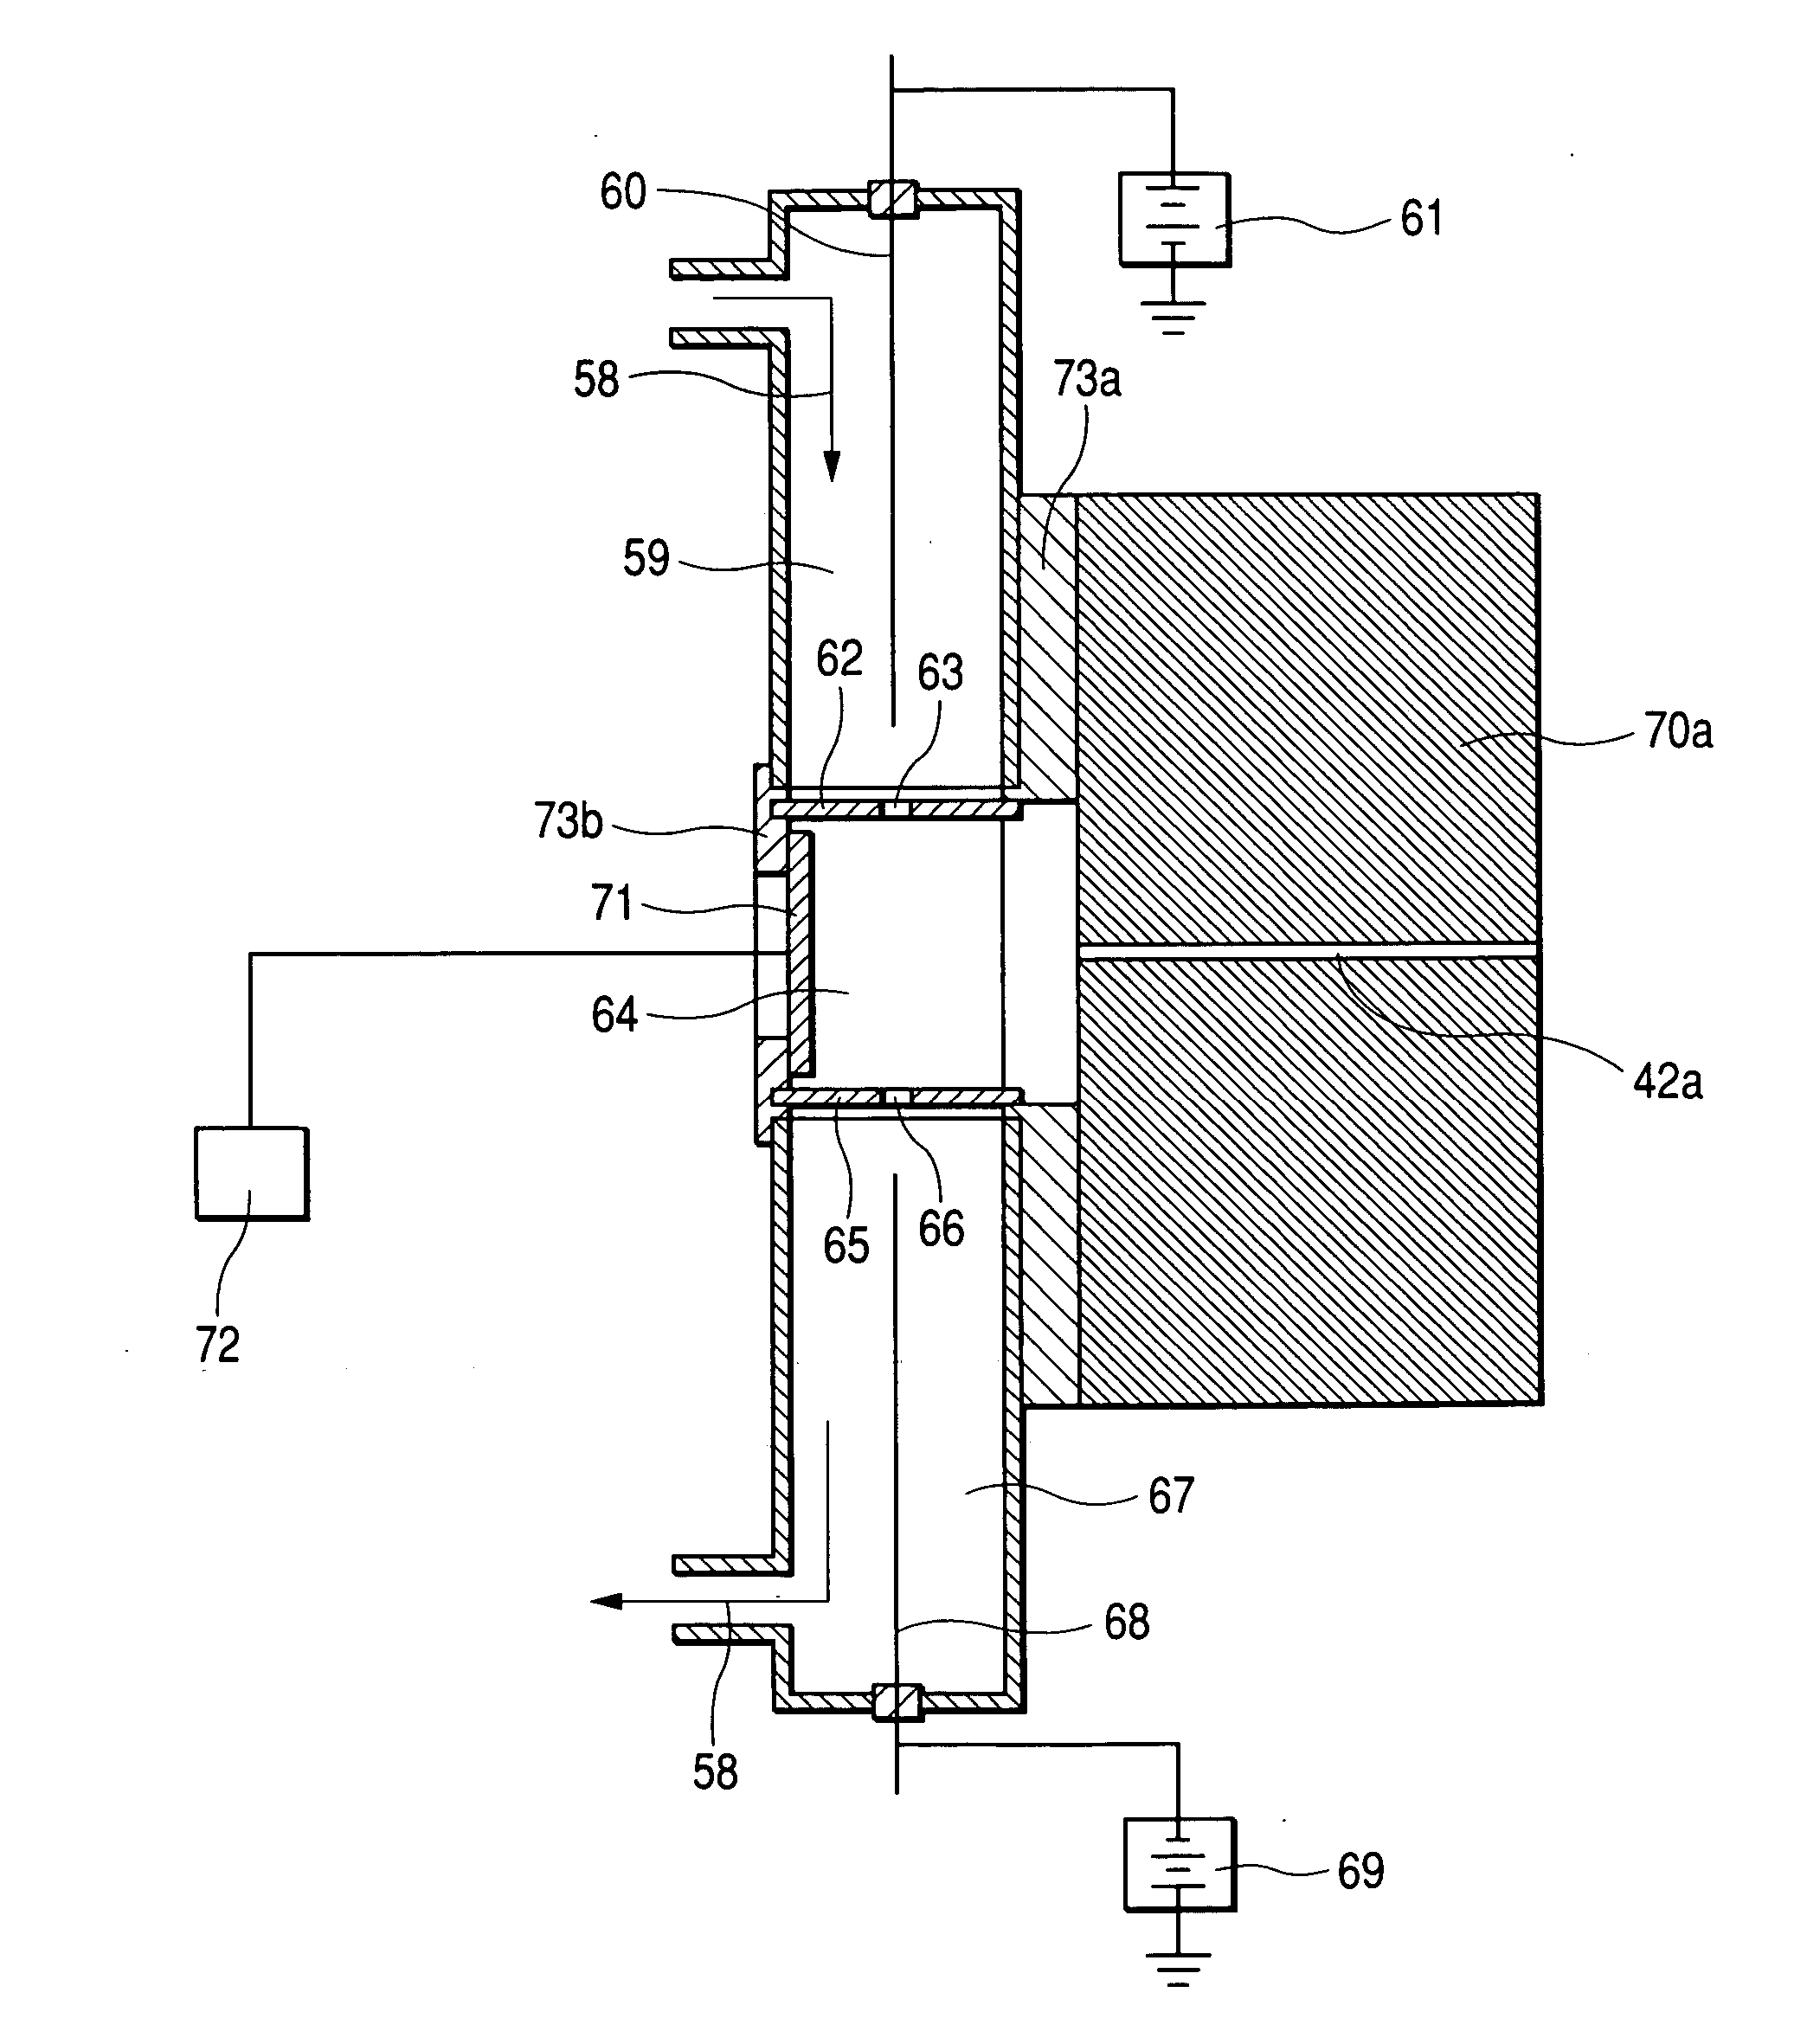 Mass spectrometric apparatus and ion source